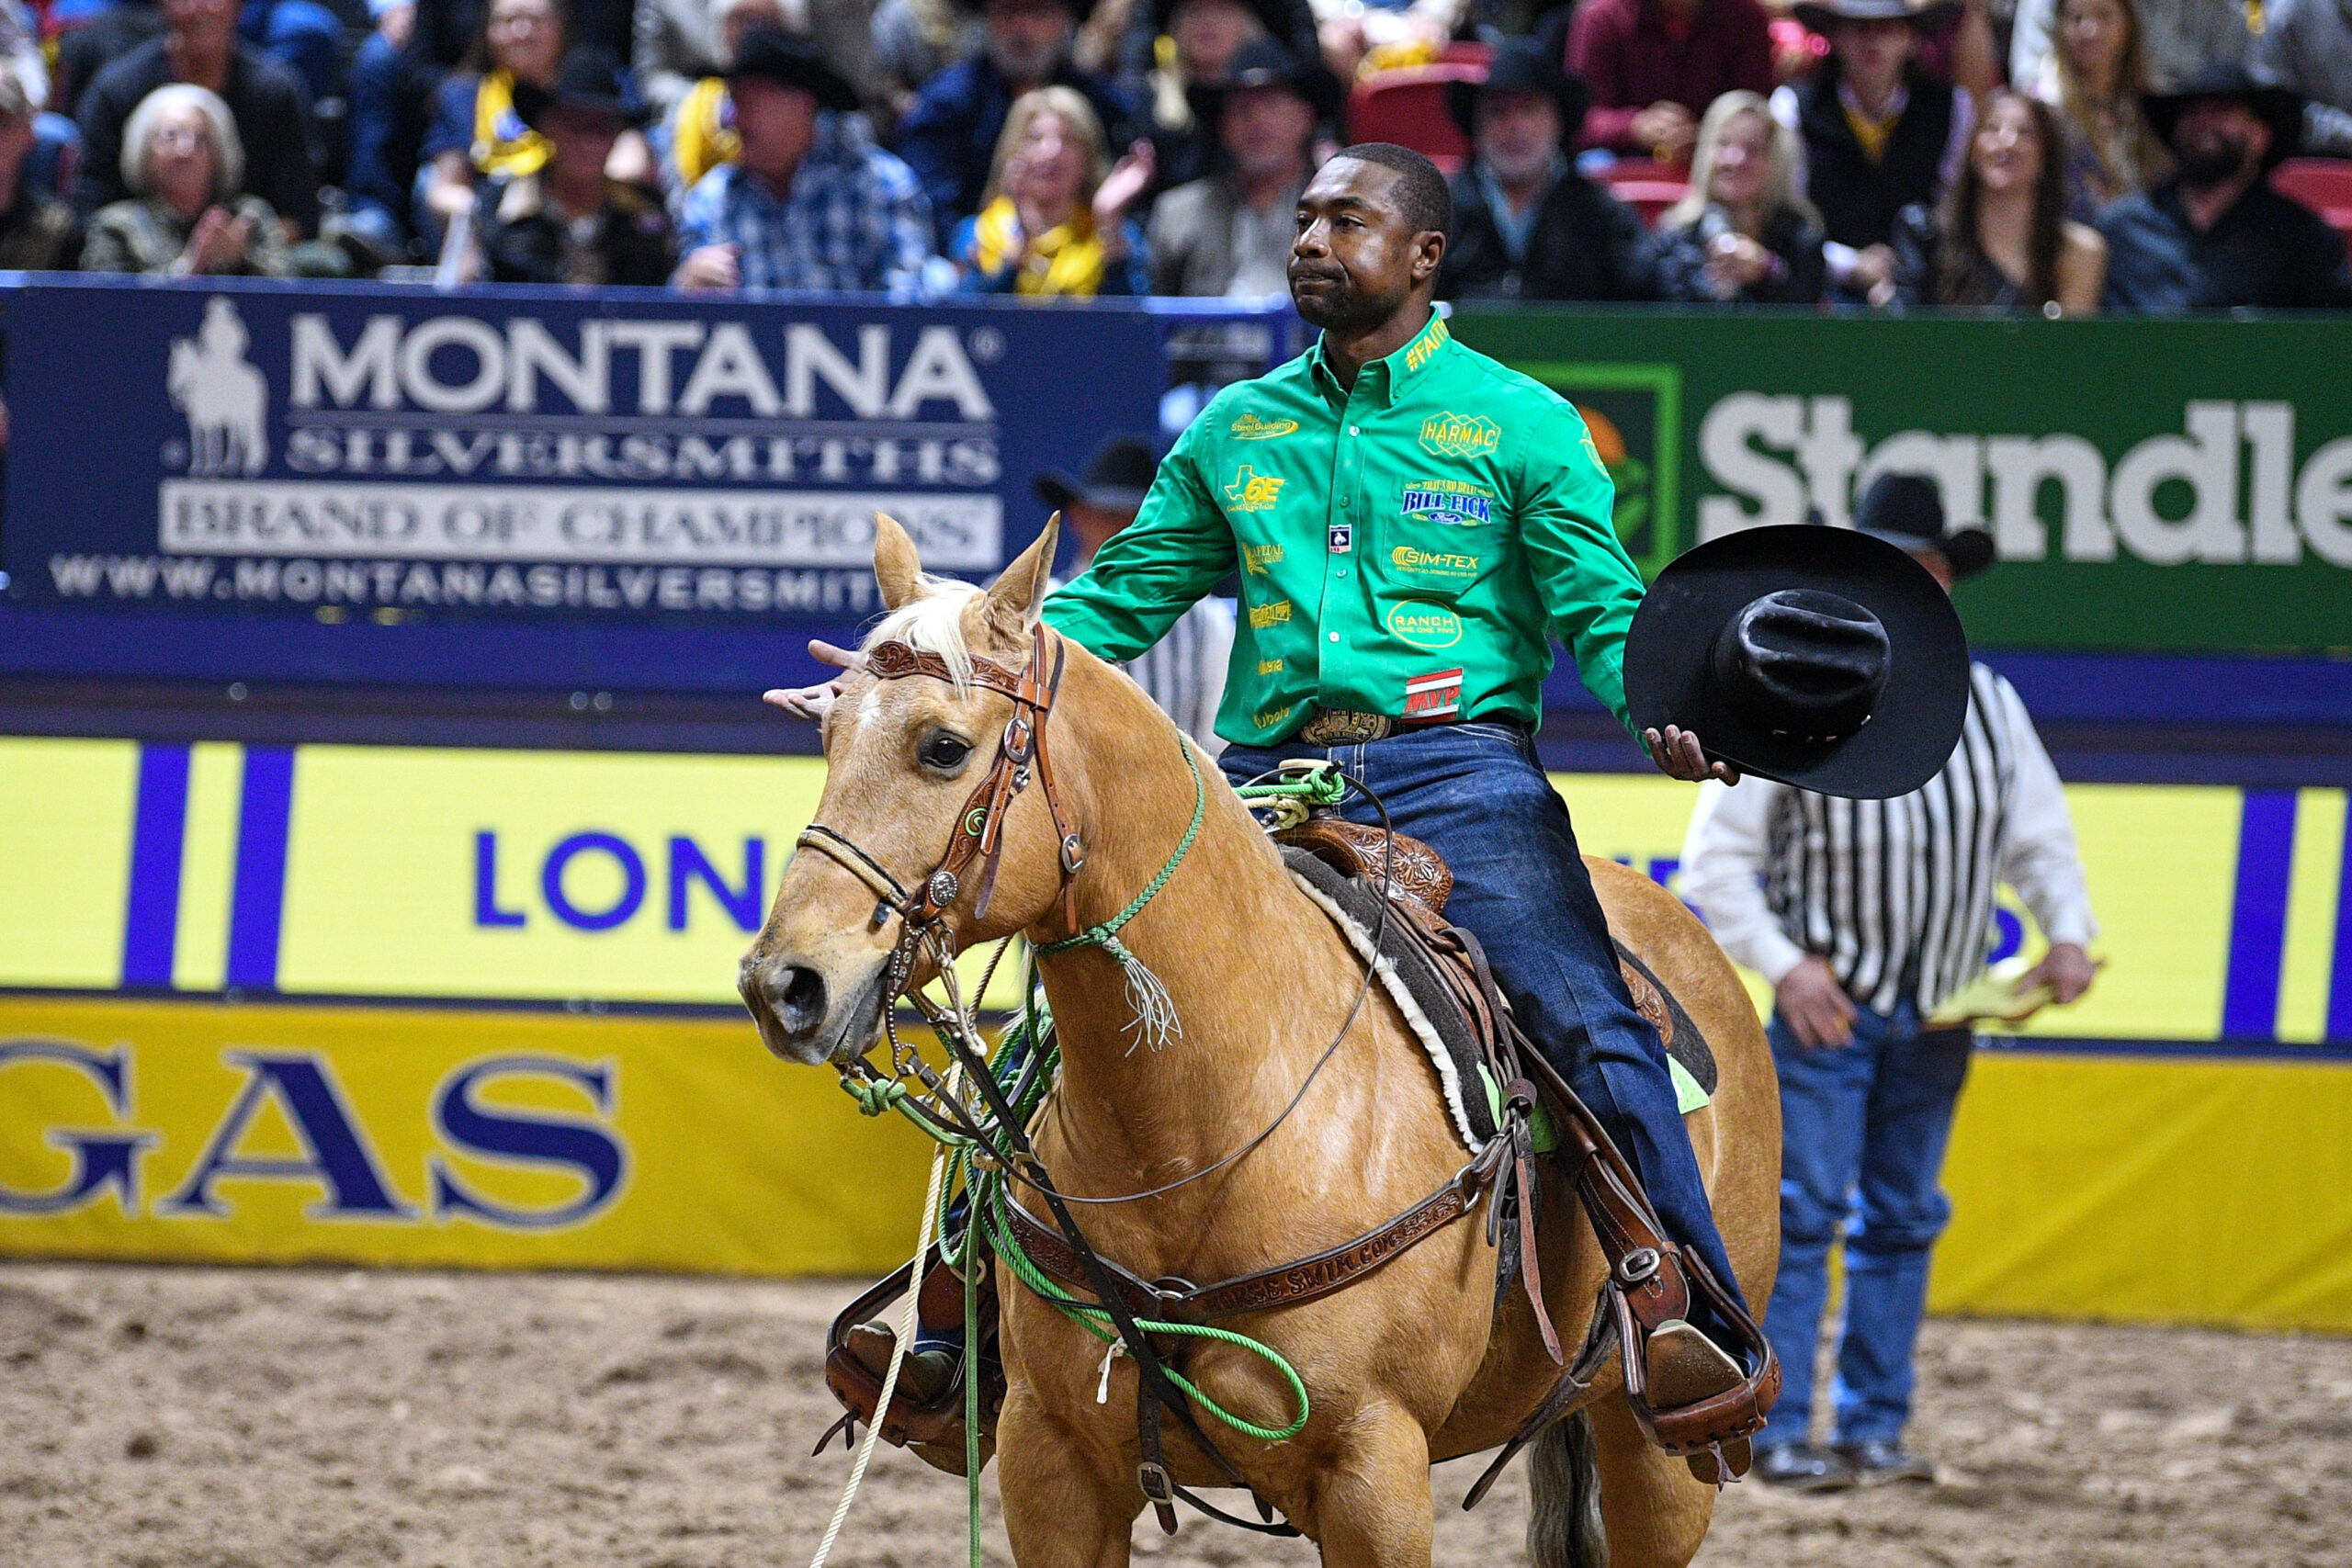 Cory Solomon is projected to finish No. 4 in the 2023 NFR—he is currently leading the average race.